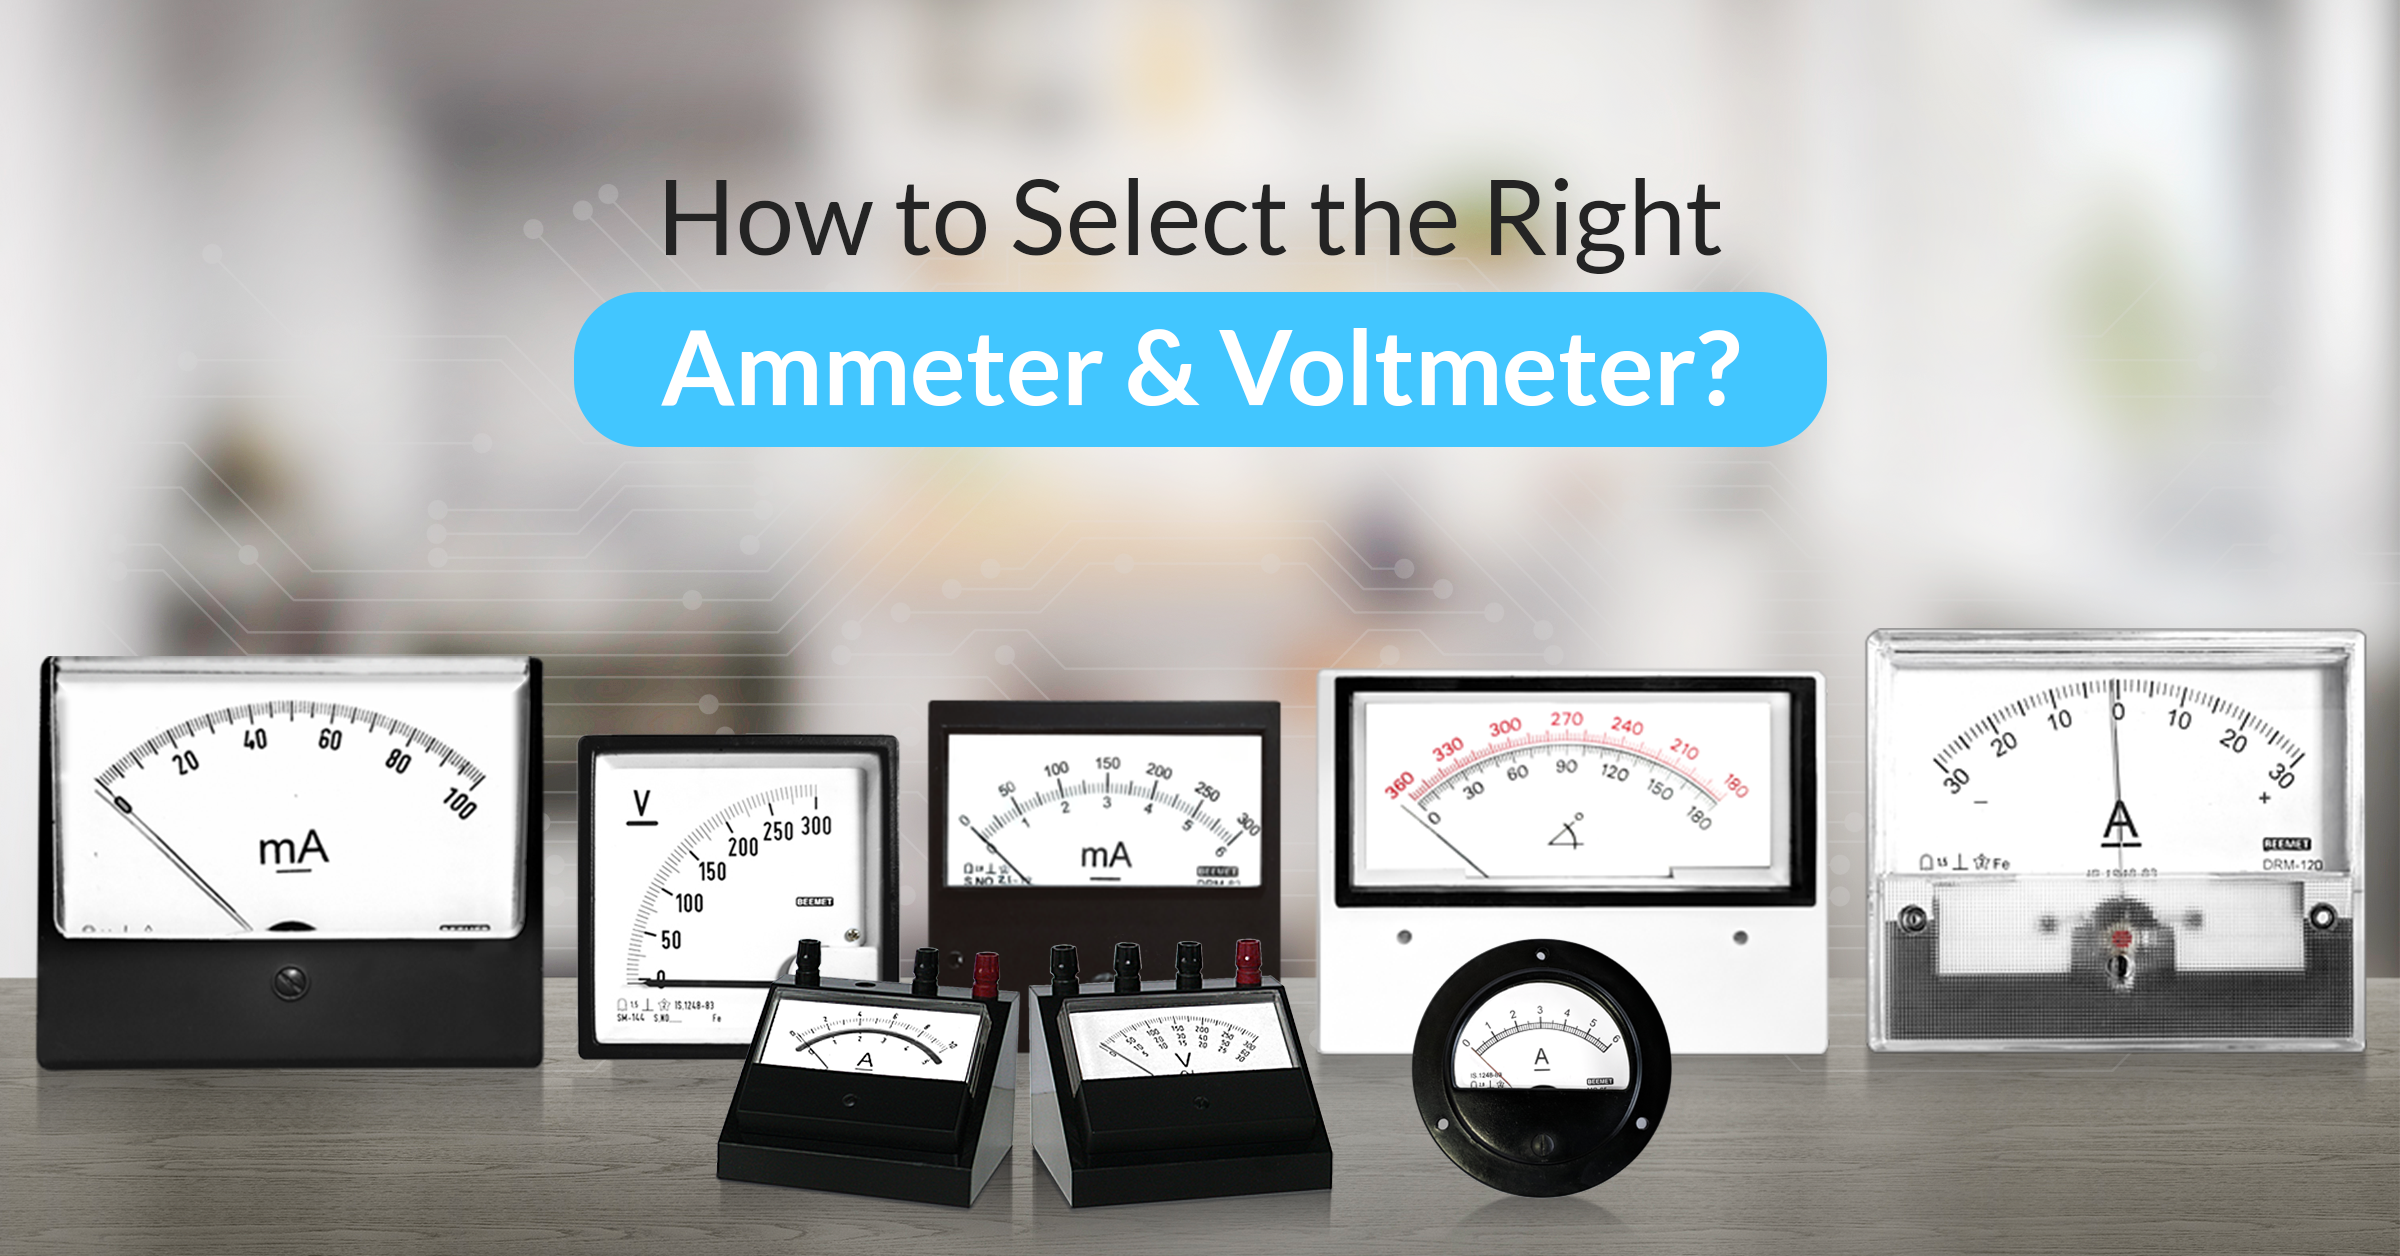 How to Select the Right Ammeter & Voltmeter - a complete guide.